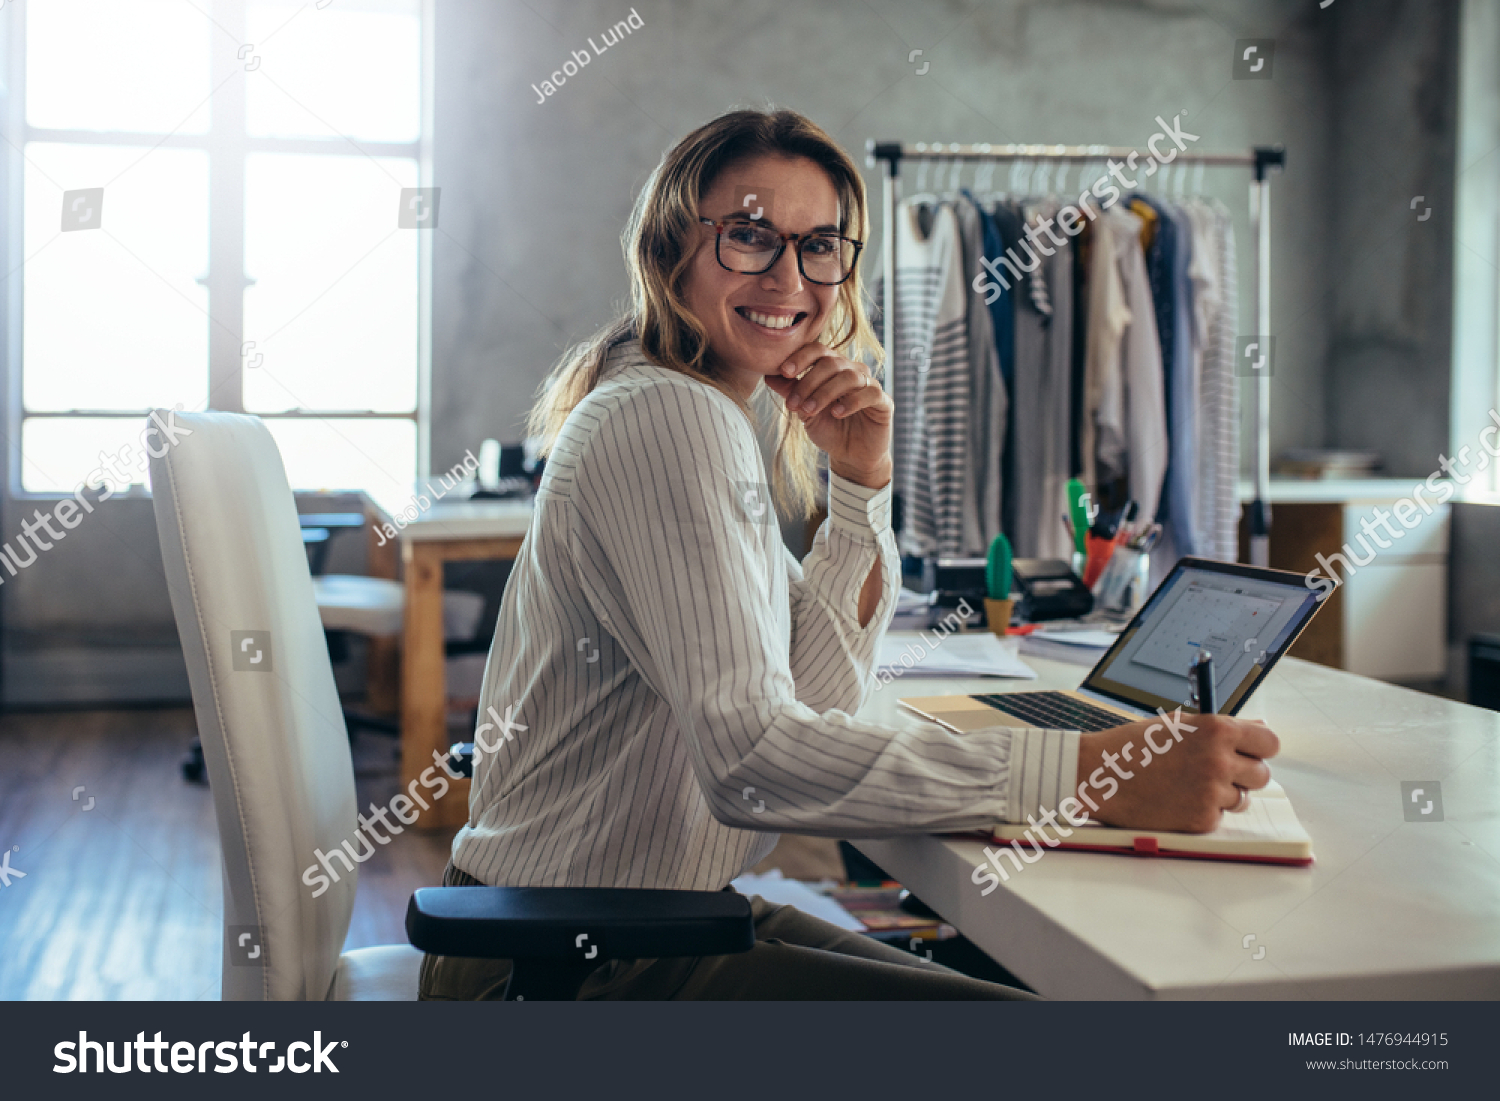 Smiling Young Woman Taking Note Orders Stock Photo 1476944915 ...